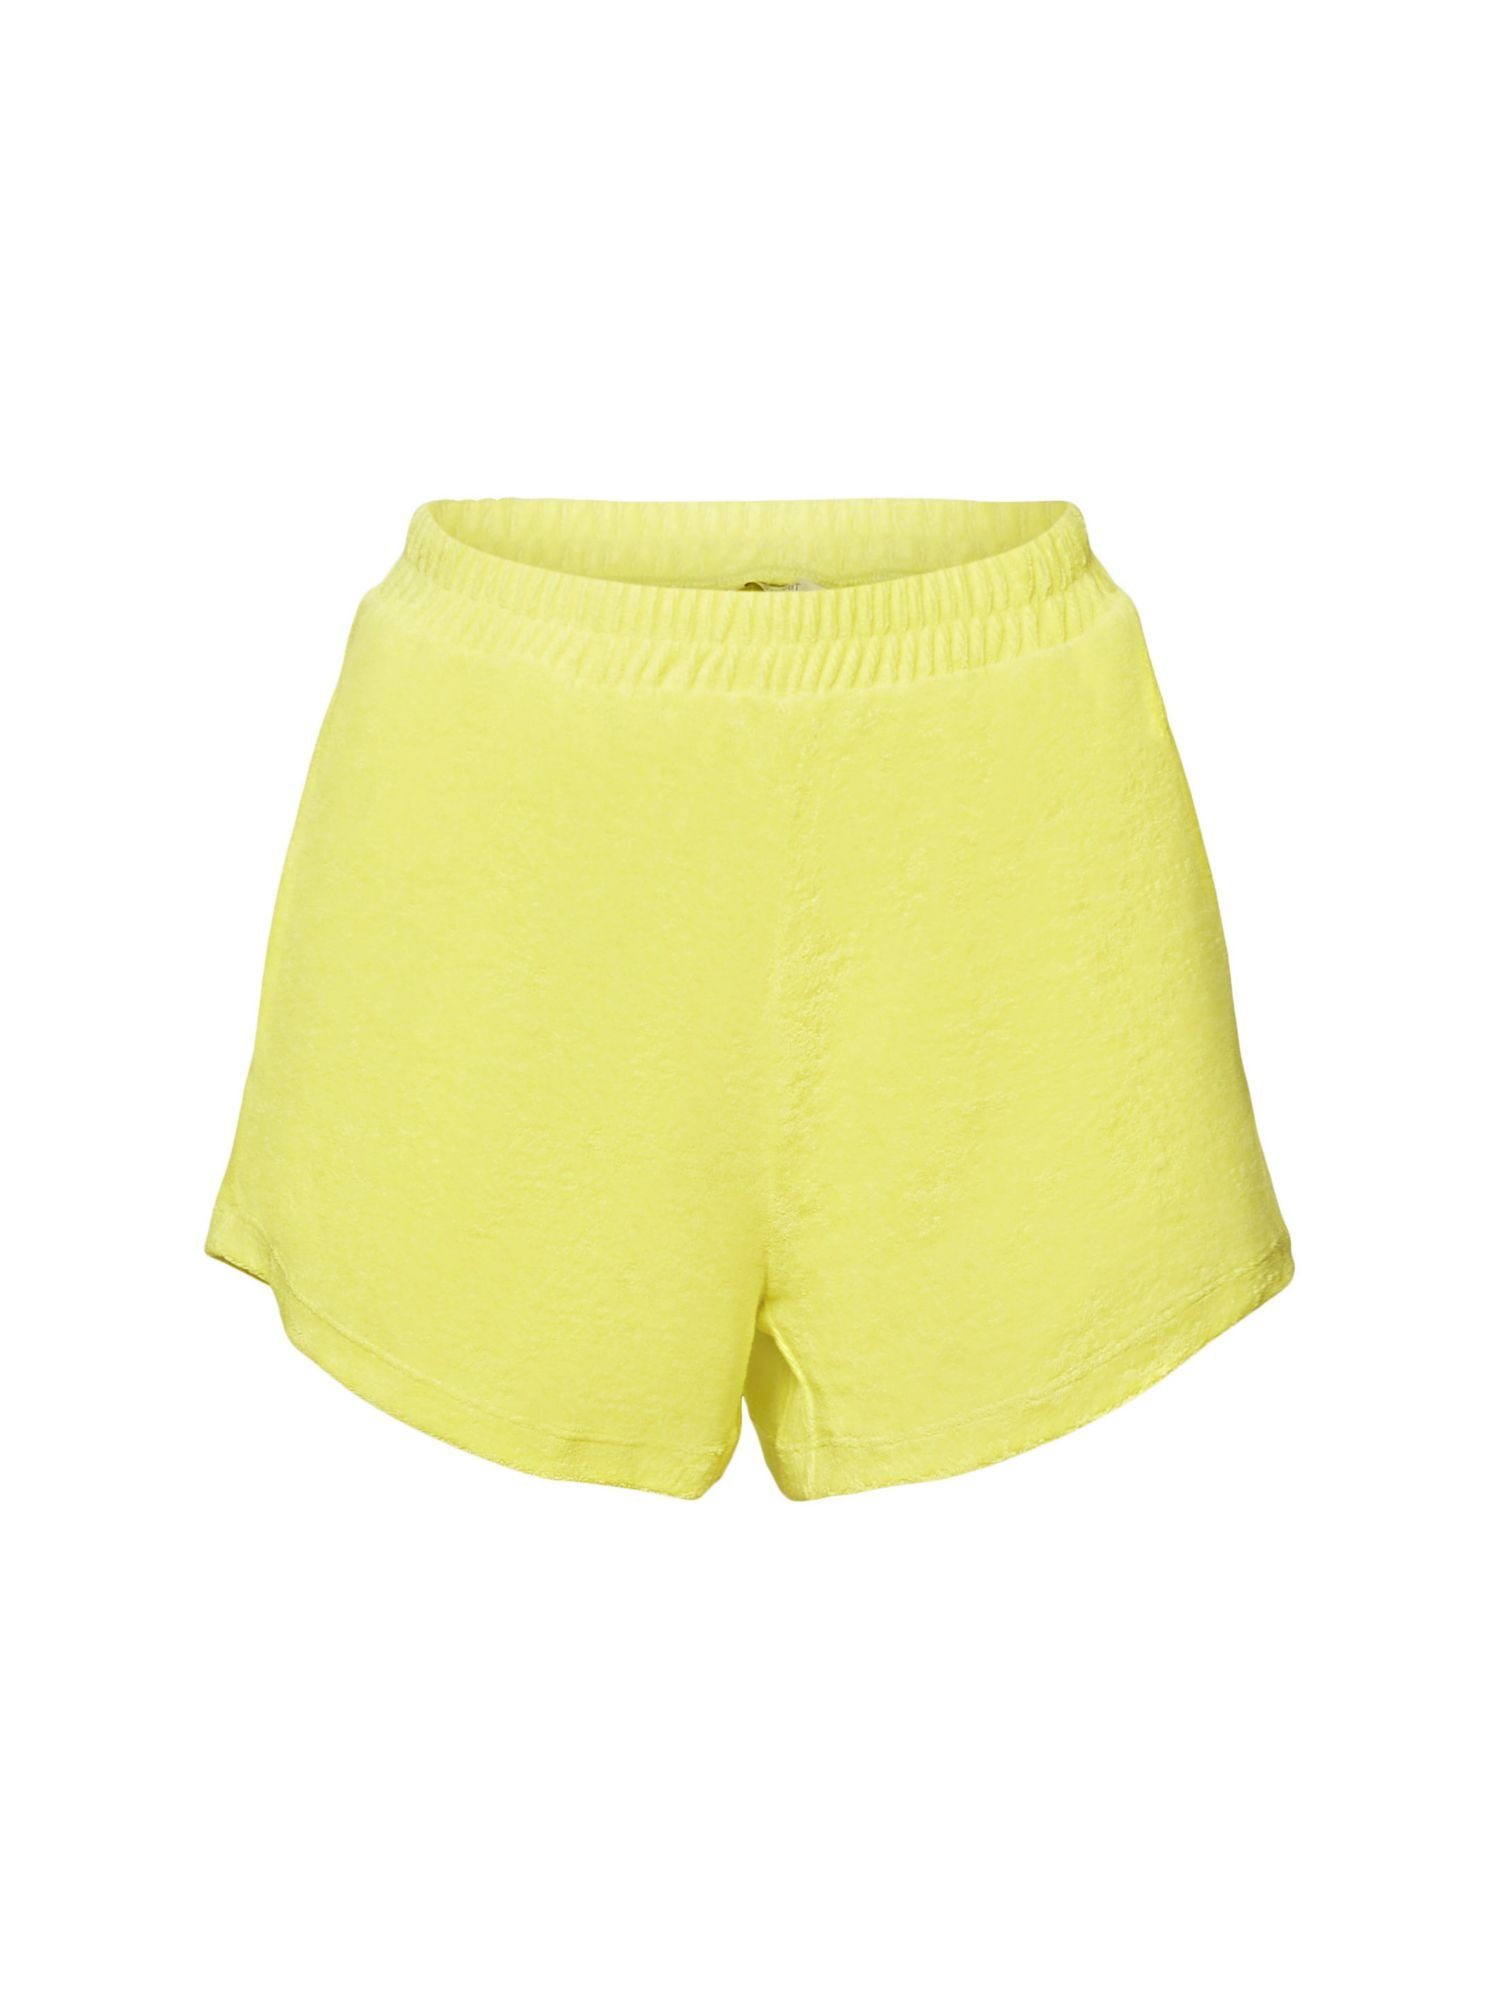 Esprit Shorts Recycelt: Strand-Shorts aus Frottee (1-tlg) LIME YELLOW